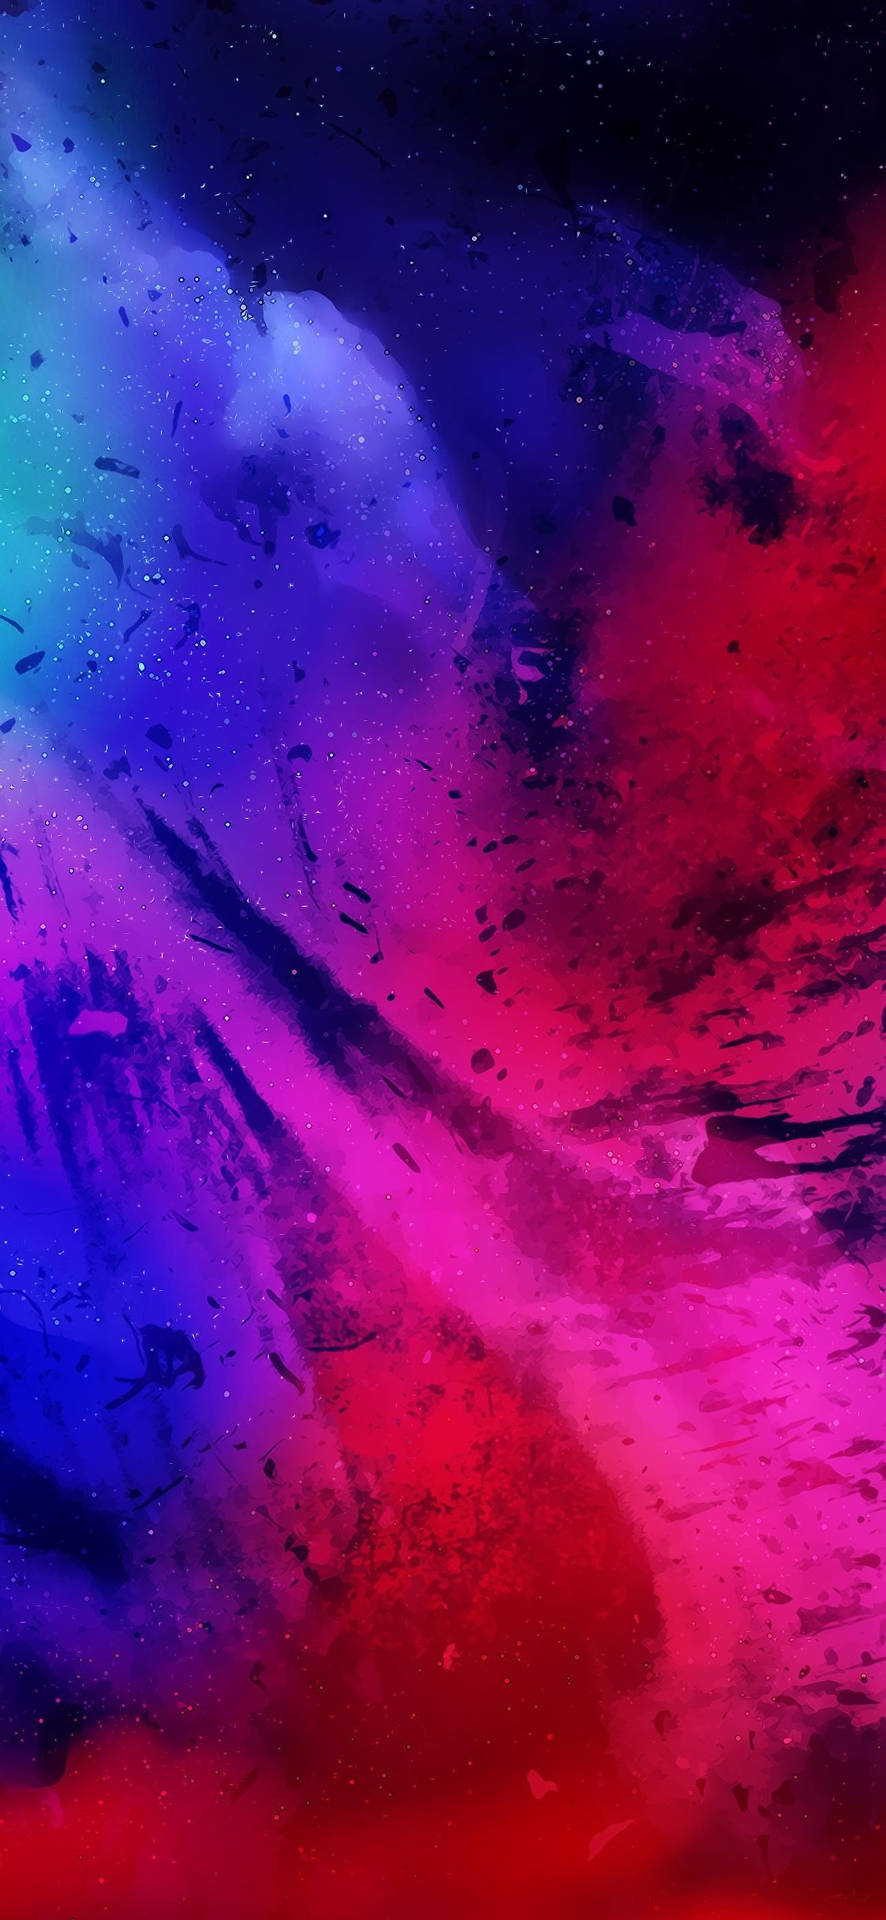 Iphone 12 Pro Max Blue And Red Background